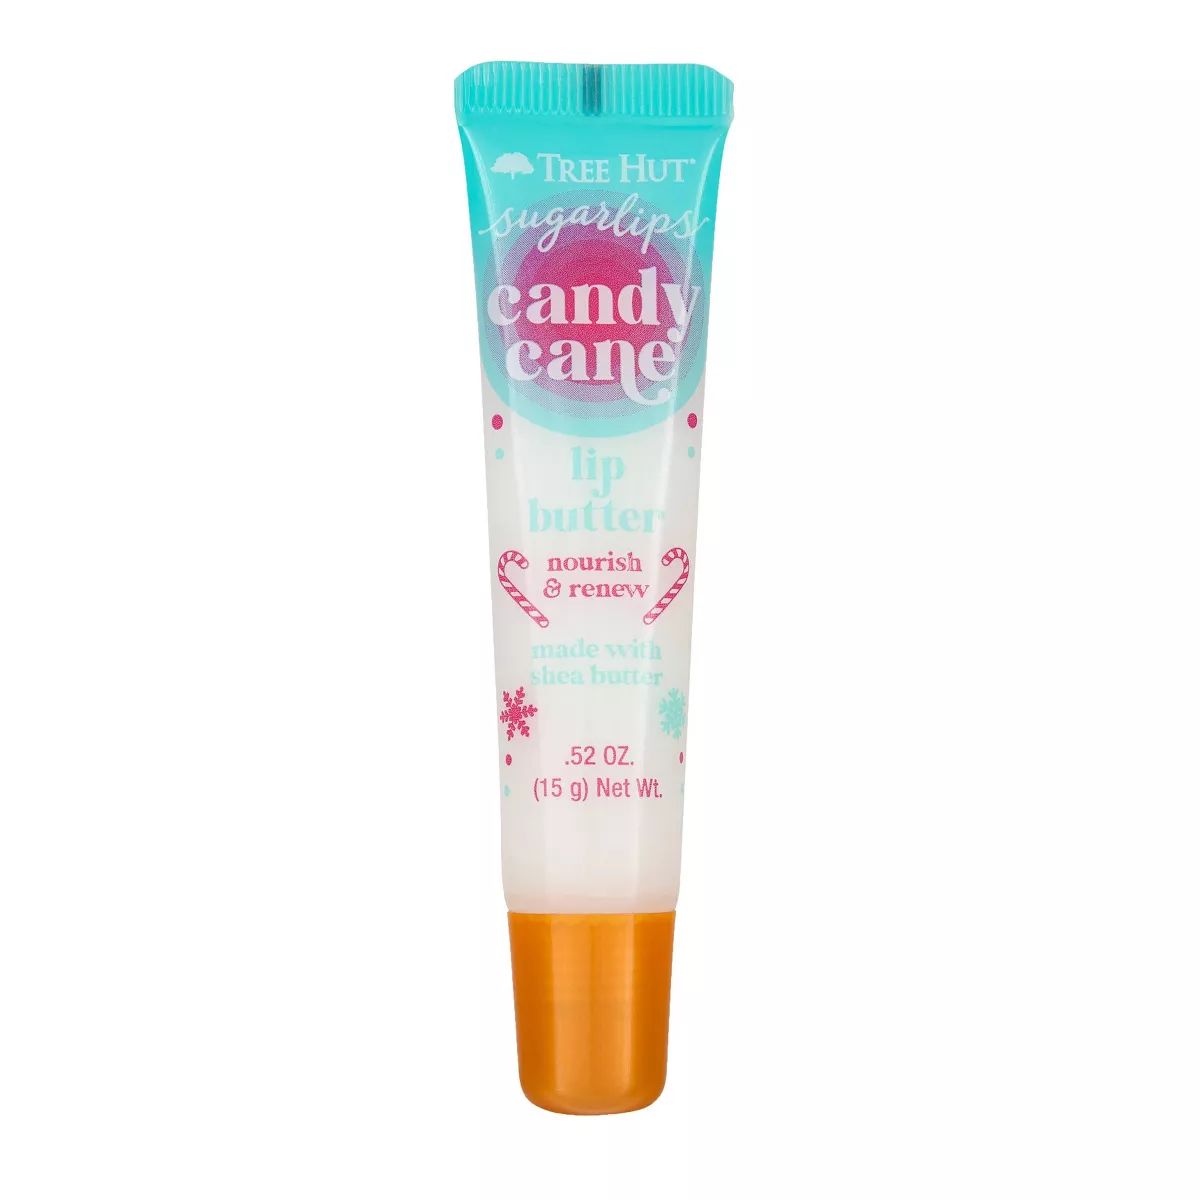 Tree Hut Candy Cane Sugarlips Lip Butter - 0.52oz | Target